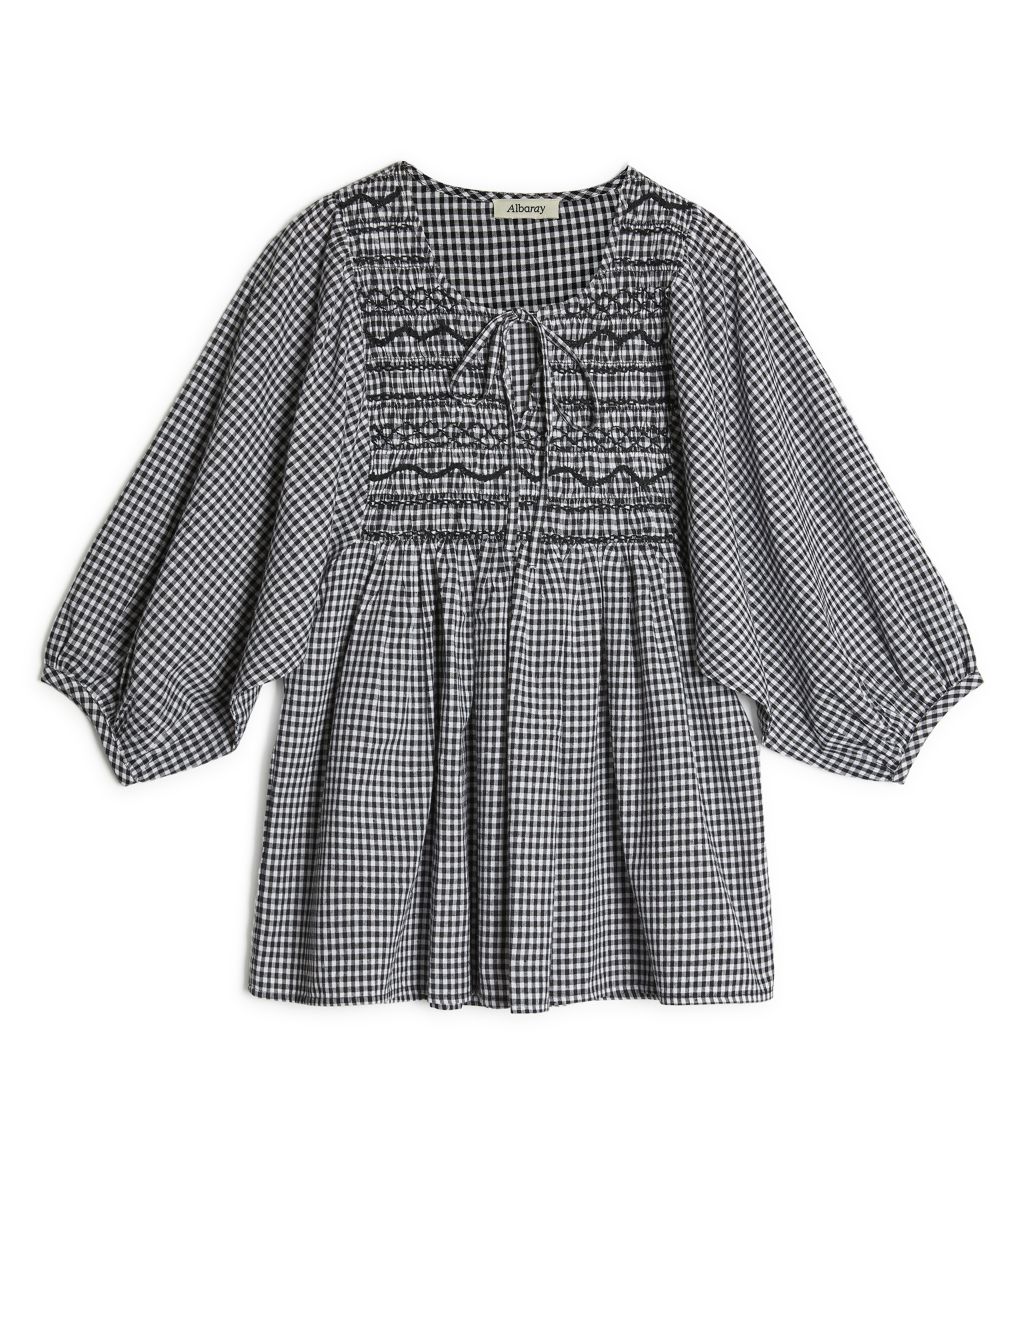 Organic Cotton Checked Smocked Blouse image 2